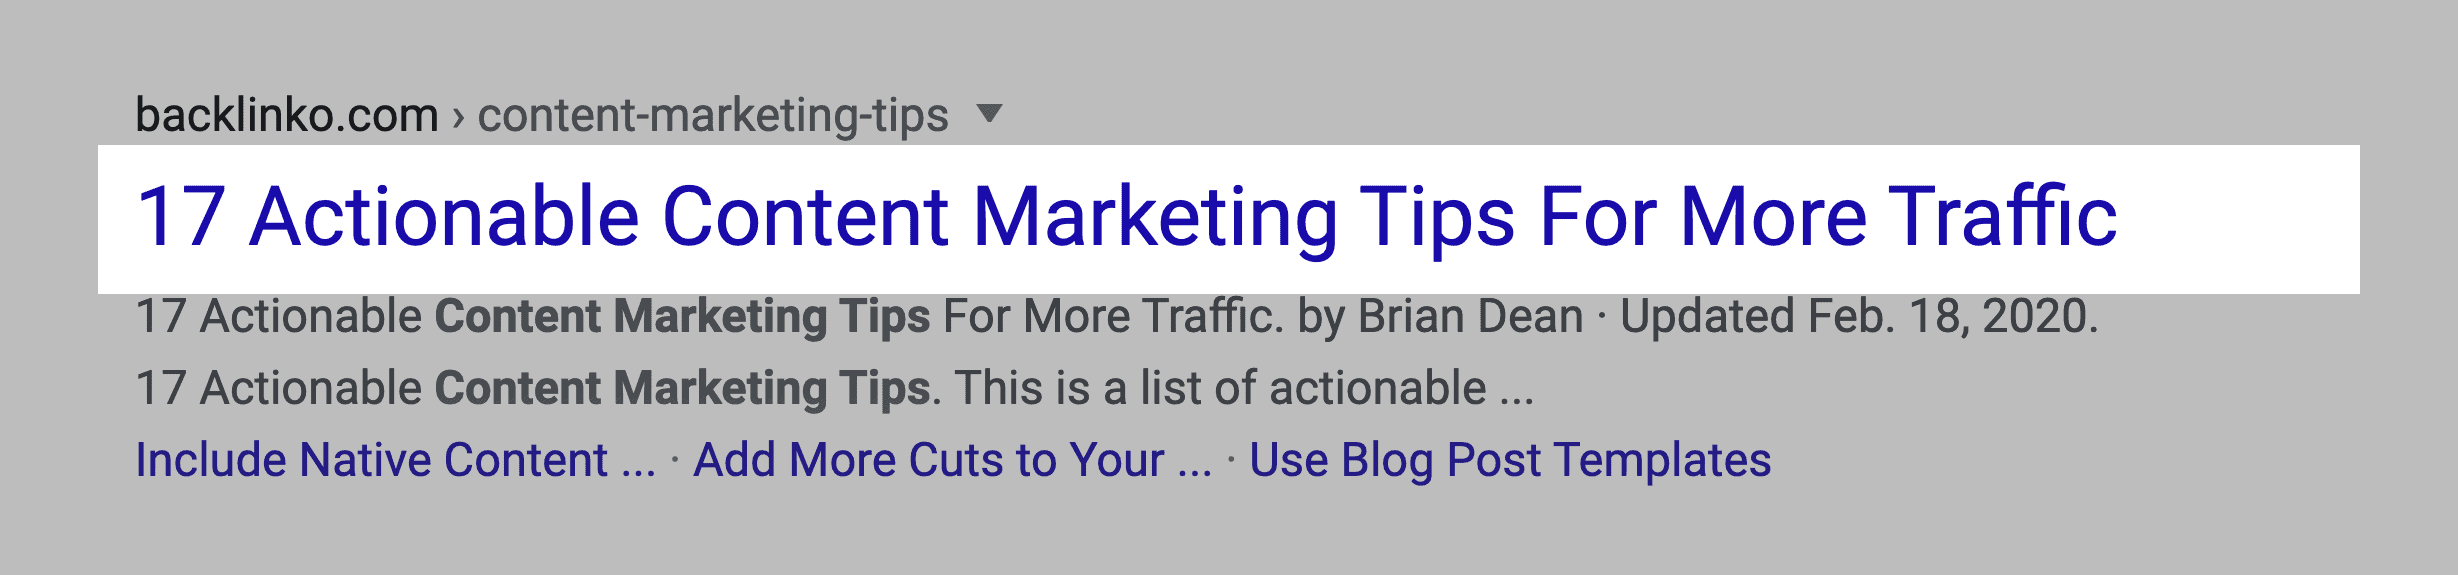 Content marketing tips post – Title tag in SERPs